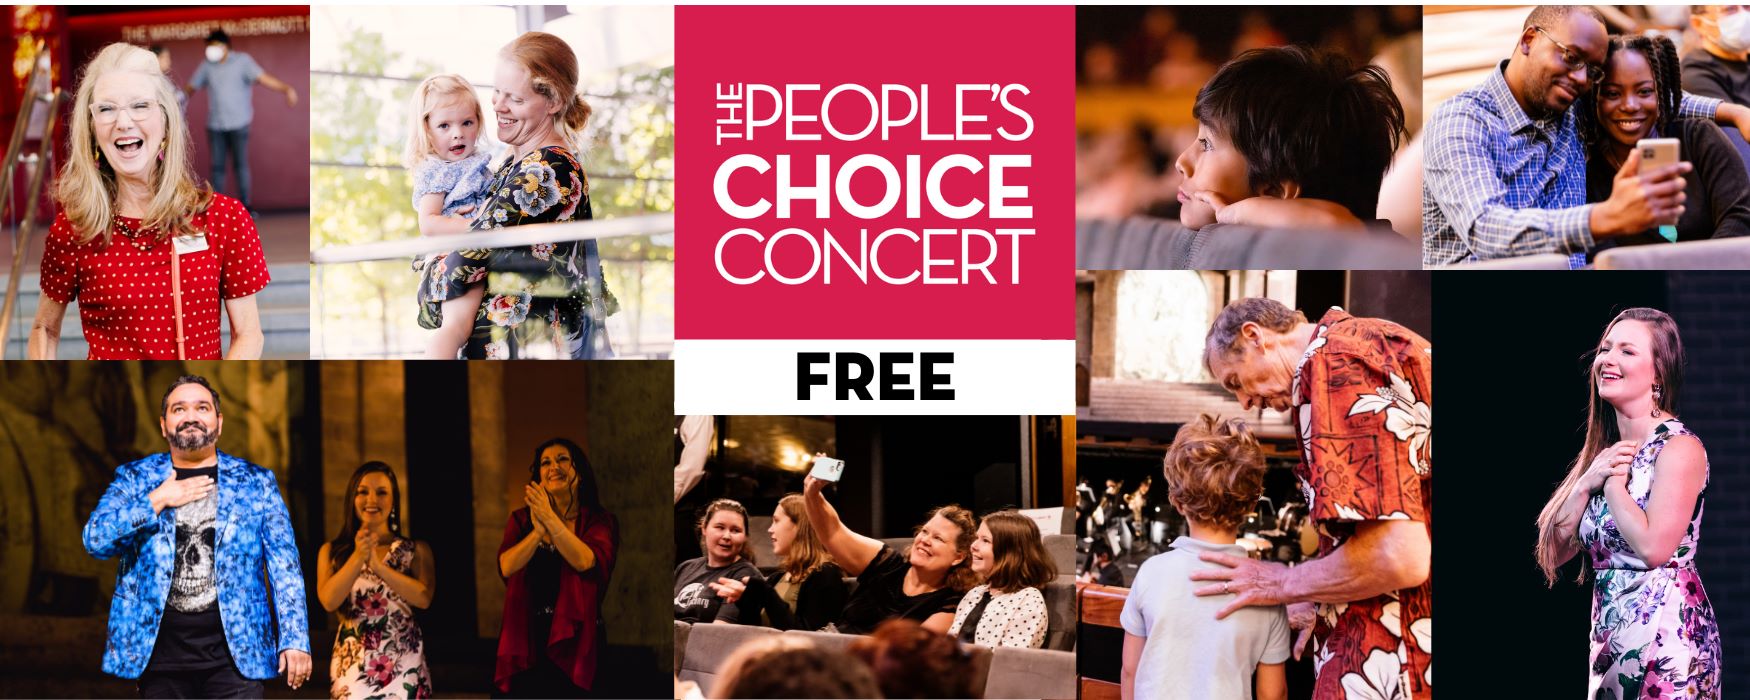 The People’s Choice Concert